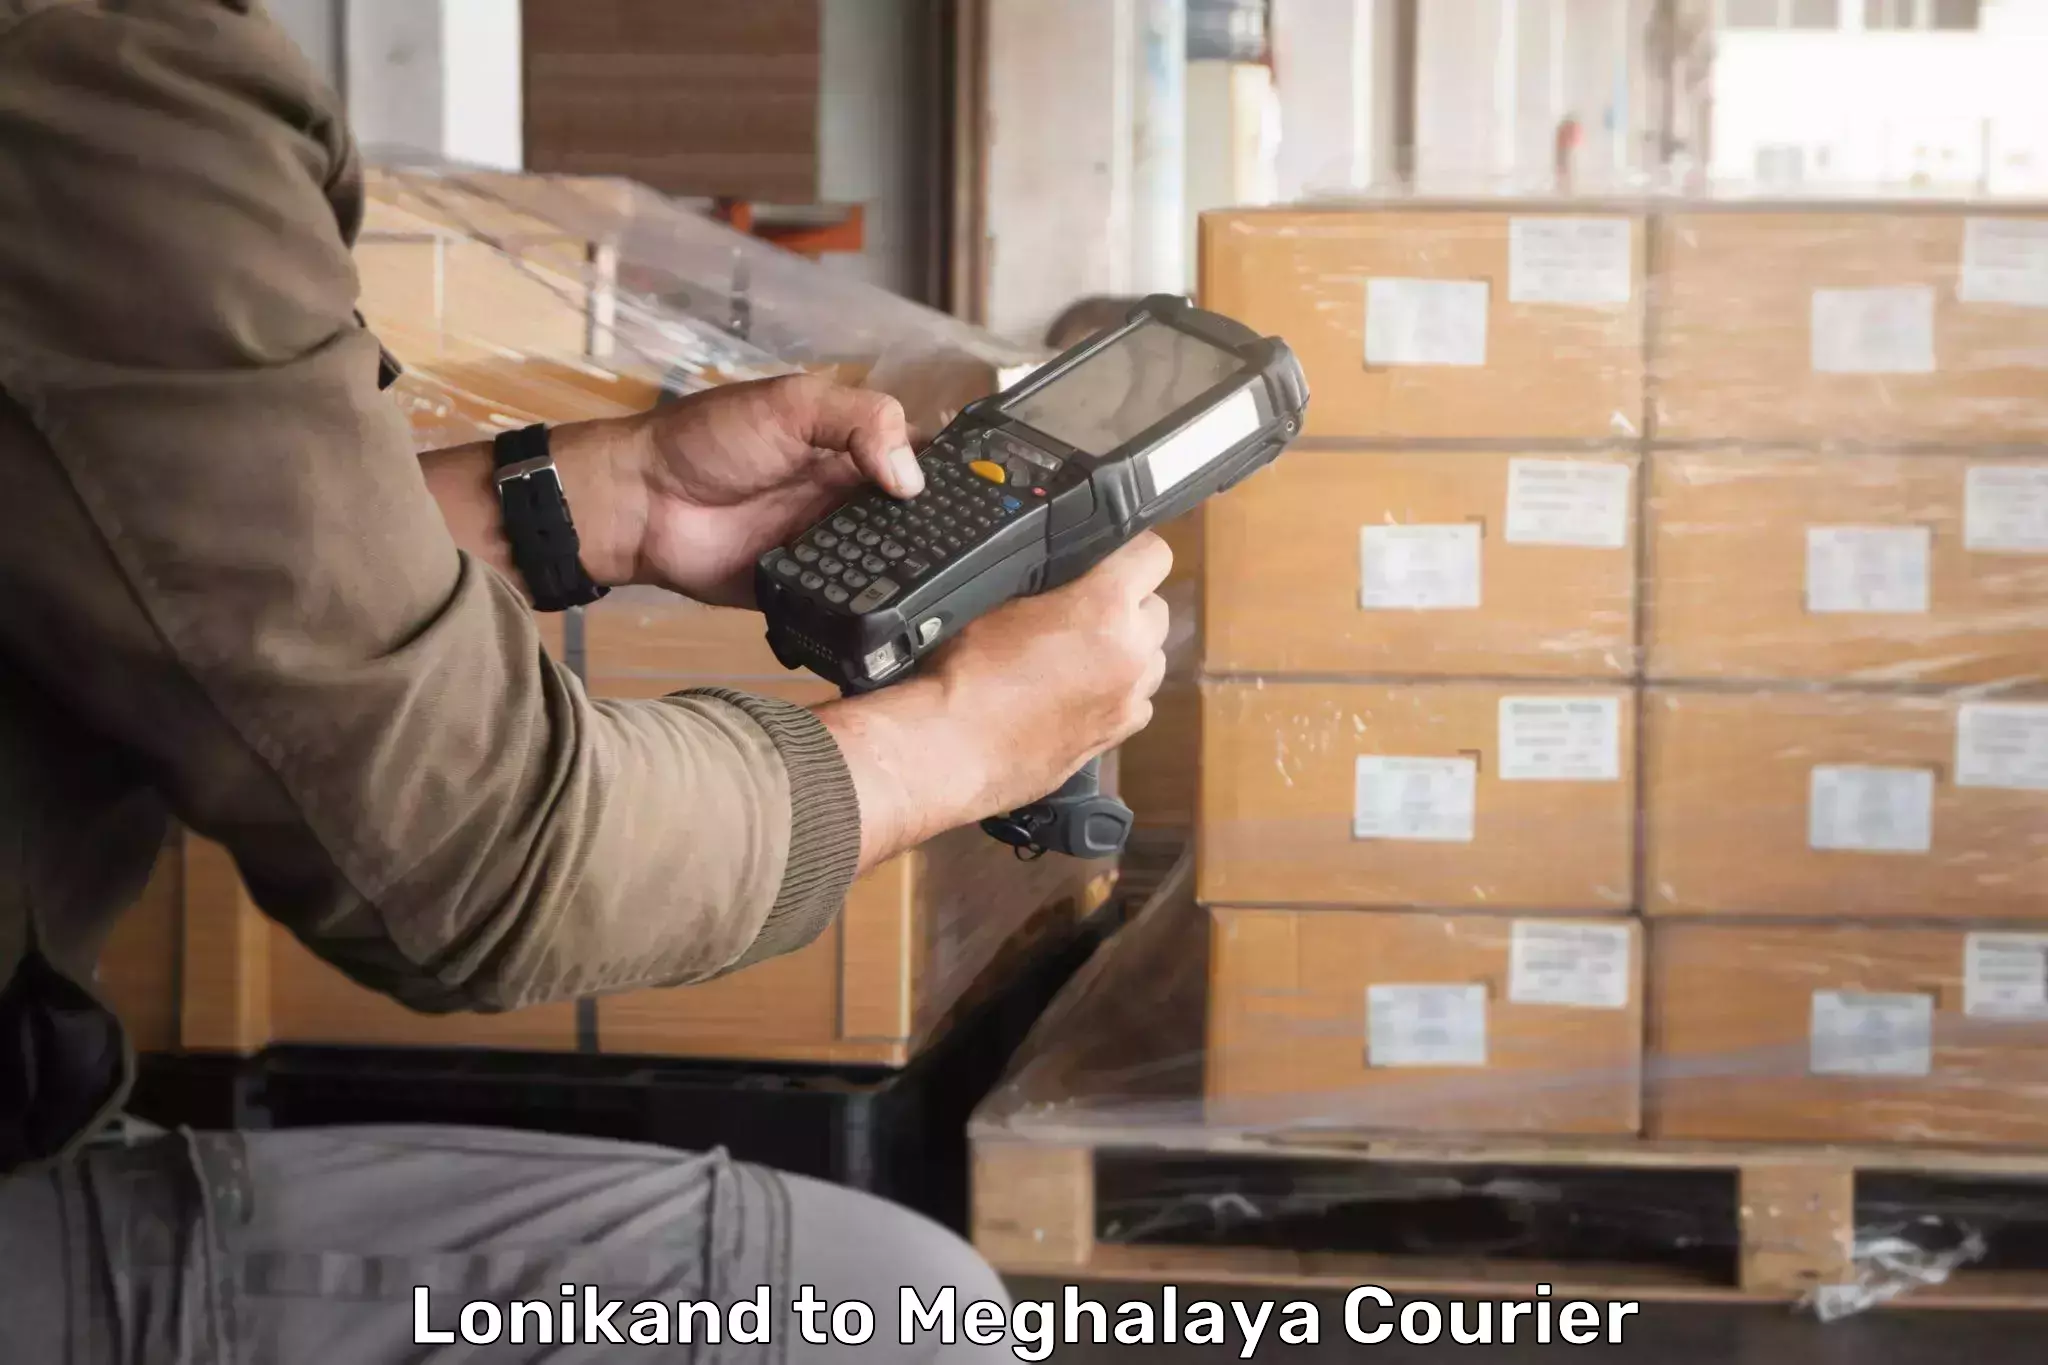 State-of-the-art courier technology Lonikand to Shillong